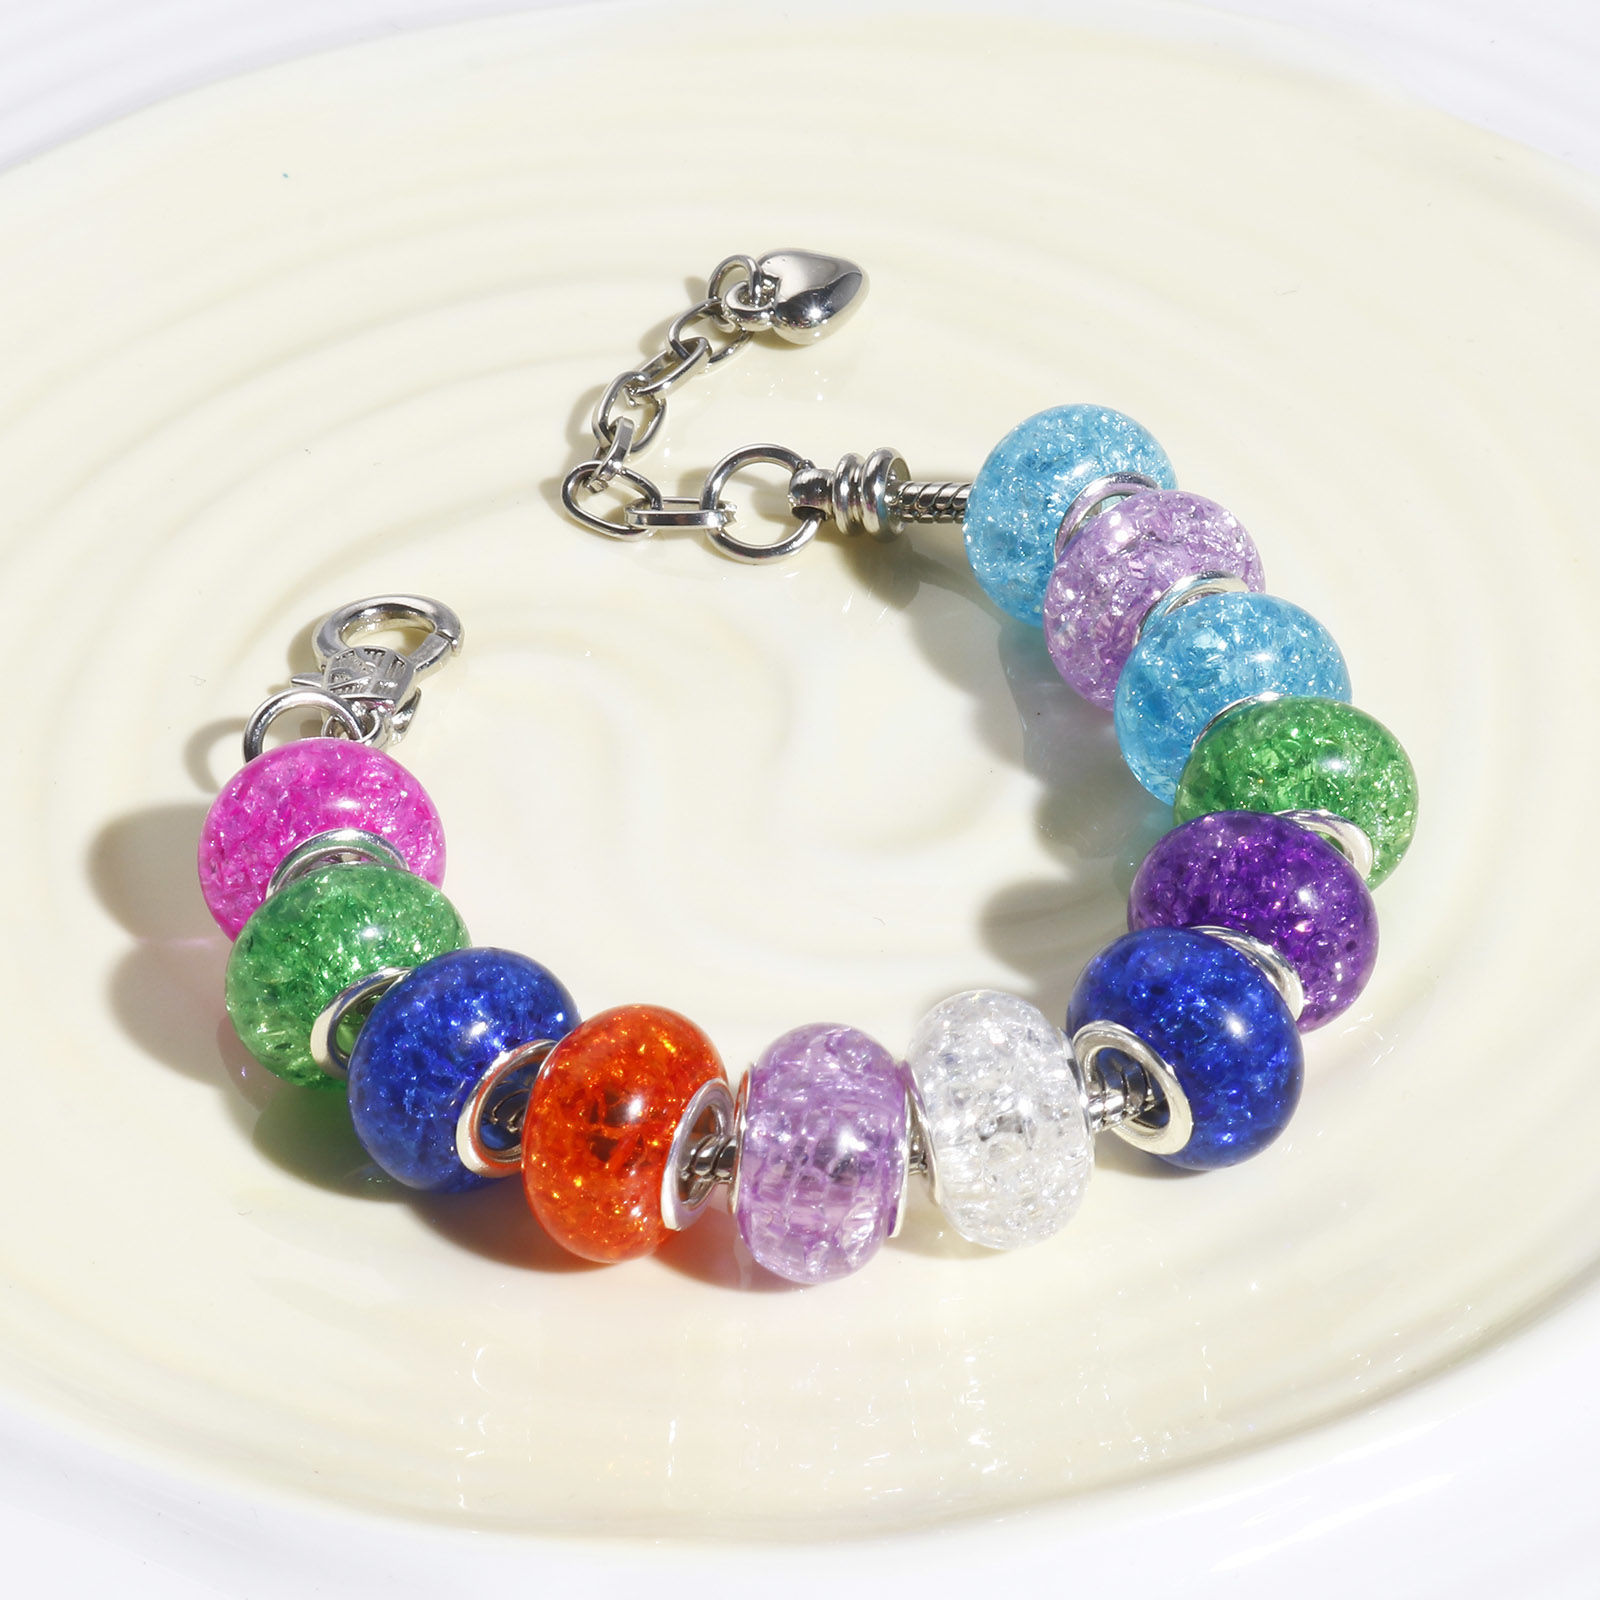 Picture of Resin European Style Large Hole Charm Beads Multicolor Round Crackle 14mm Dia.